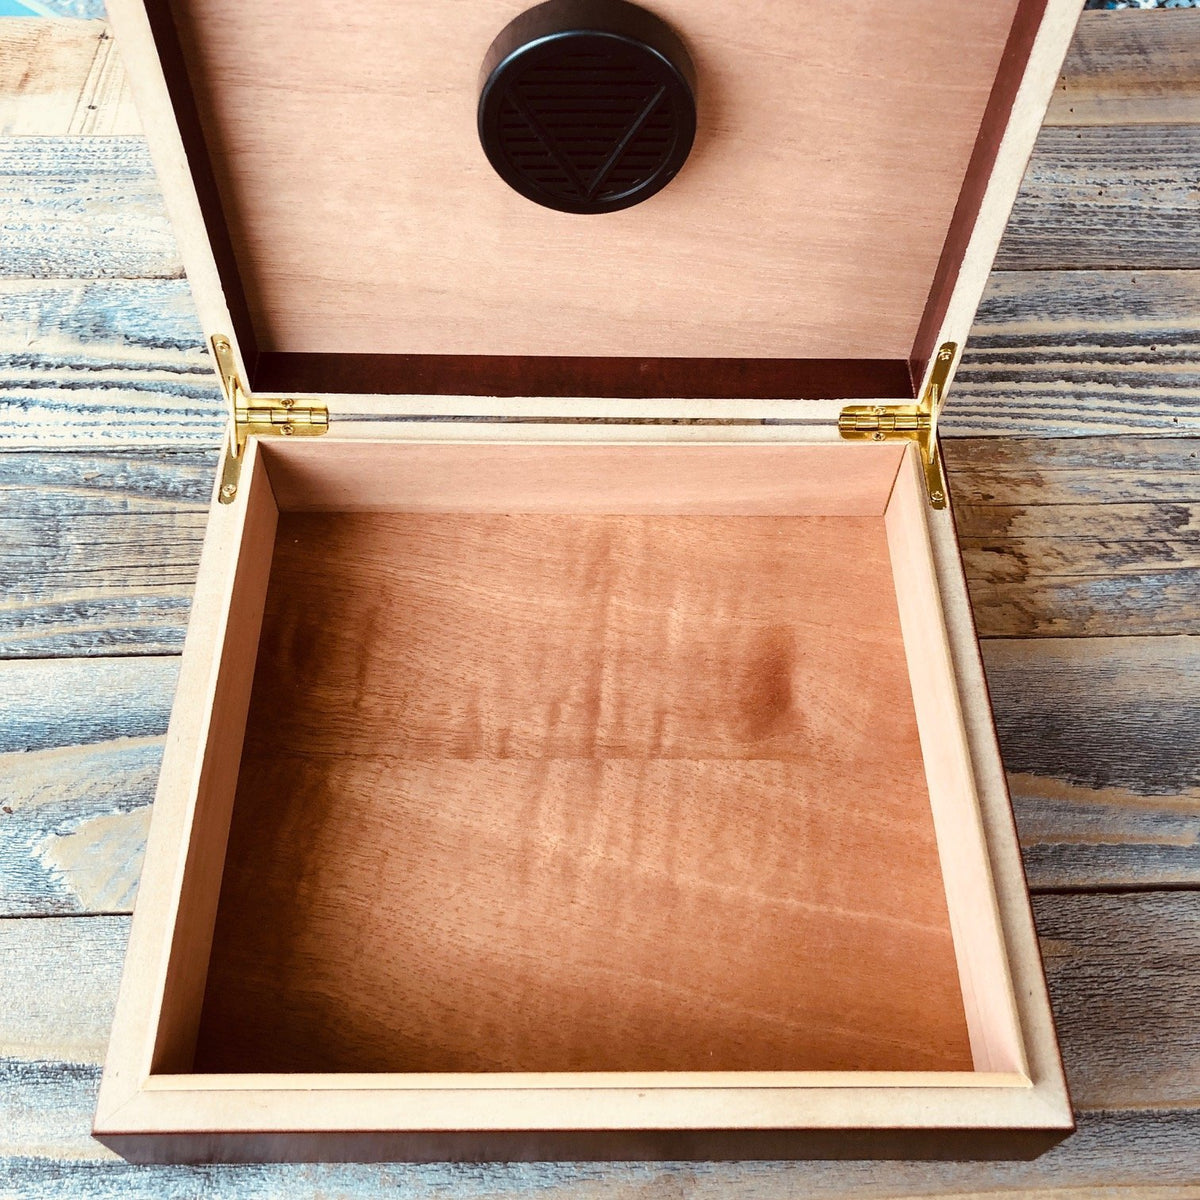 Wooden Gift Box - St George Leather Shop